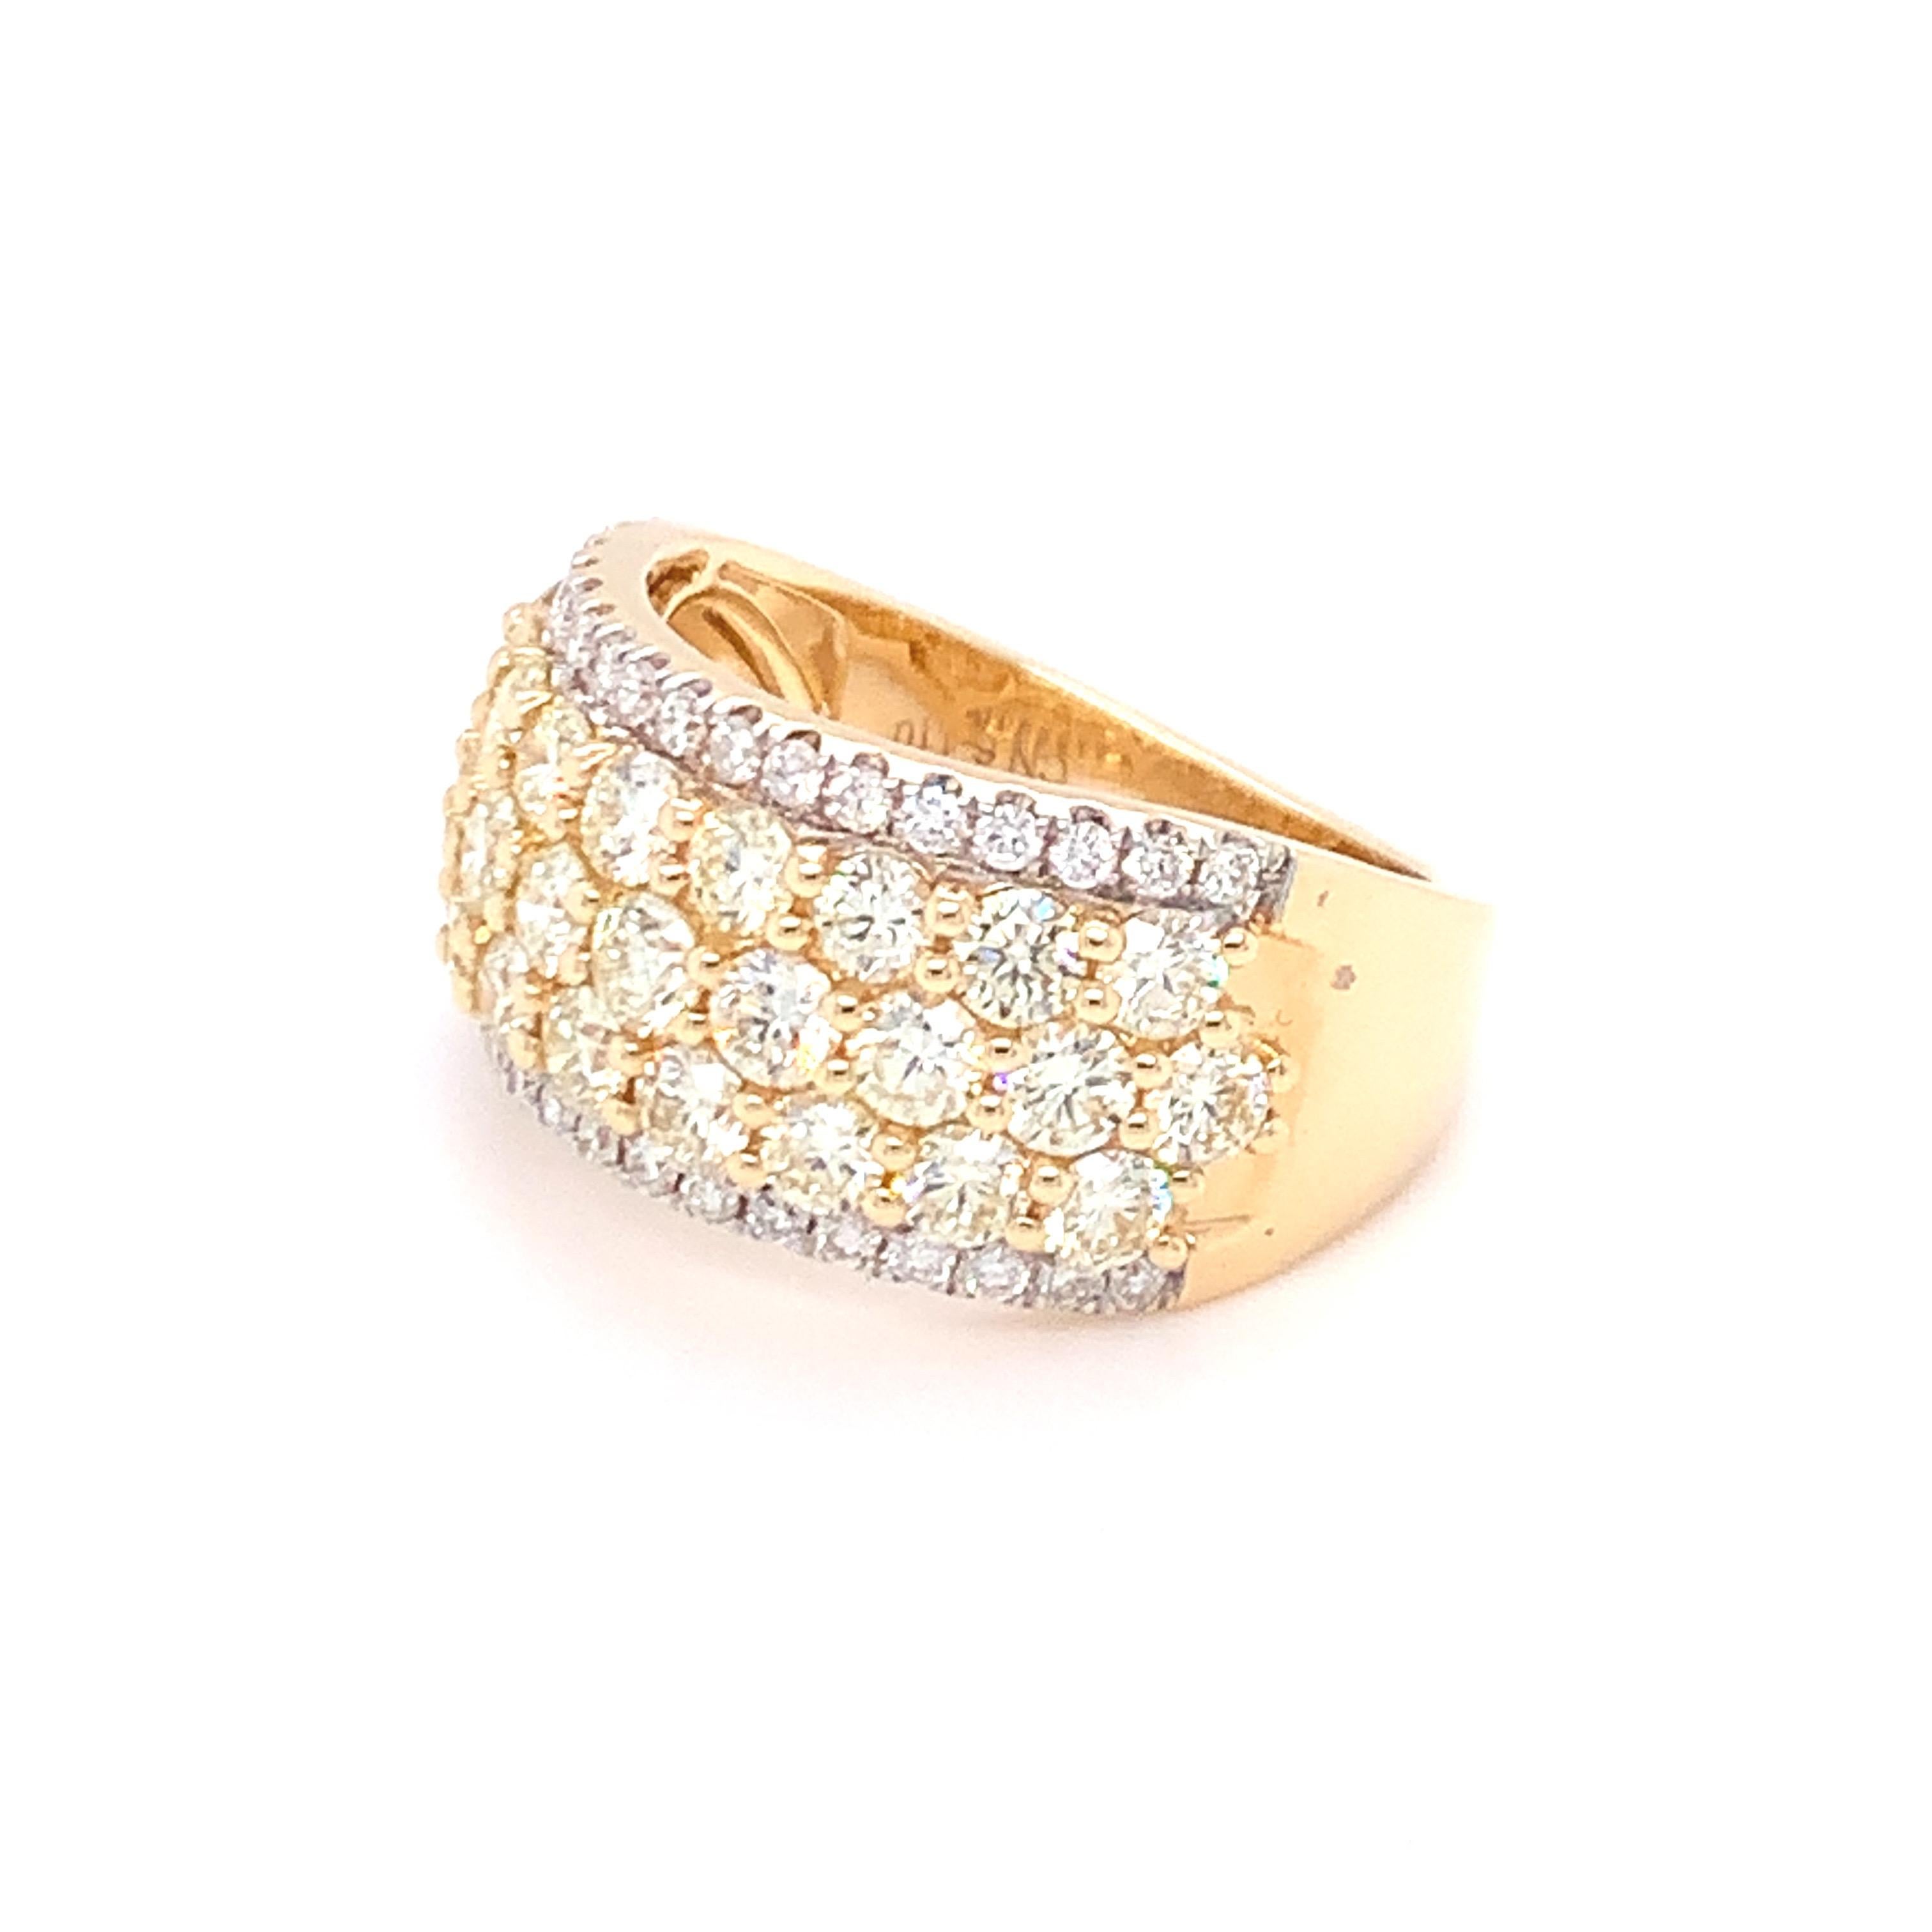 2.50 Carat Yellow & White Diamond Band Ring in 14k Yellow Gold For Sale 4